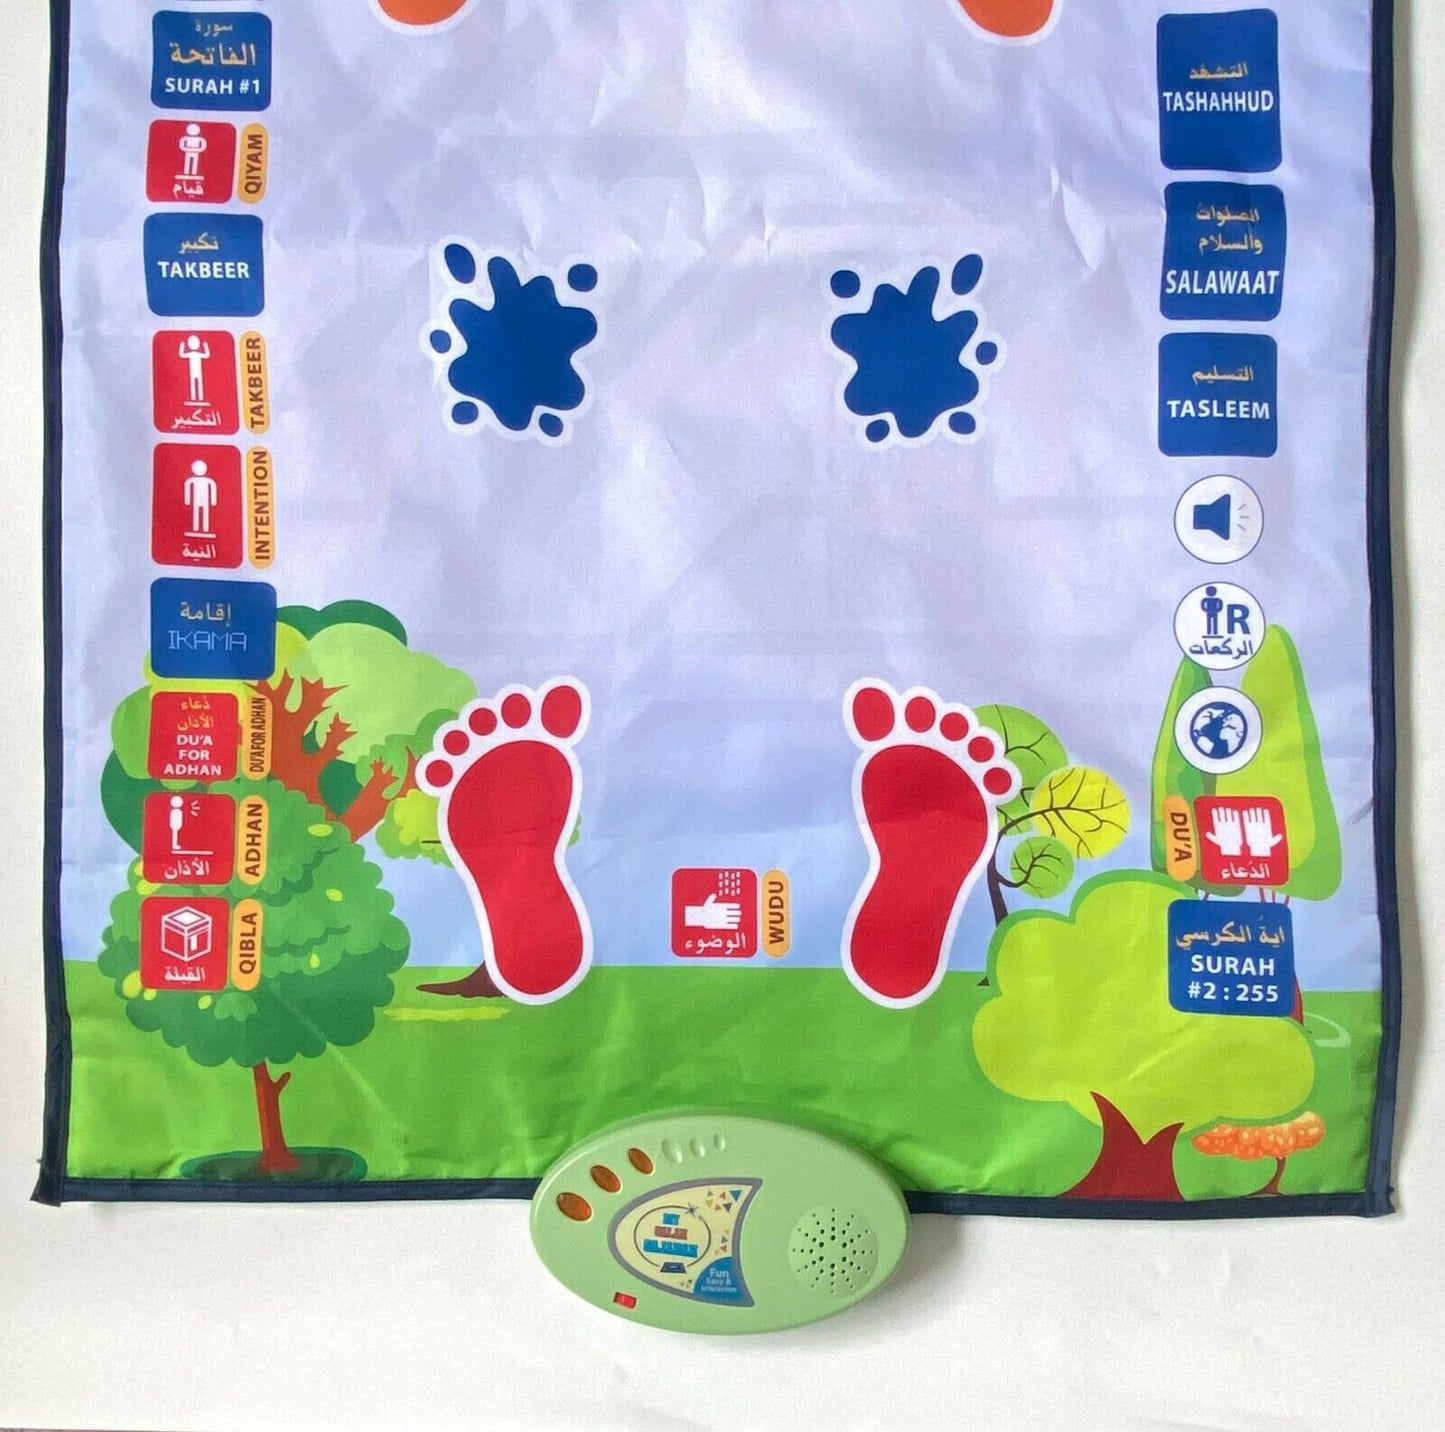 Kids Prayer Mat with Compass with Qibla finder - Enable them to learn Salah quicker